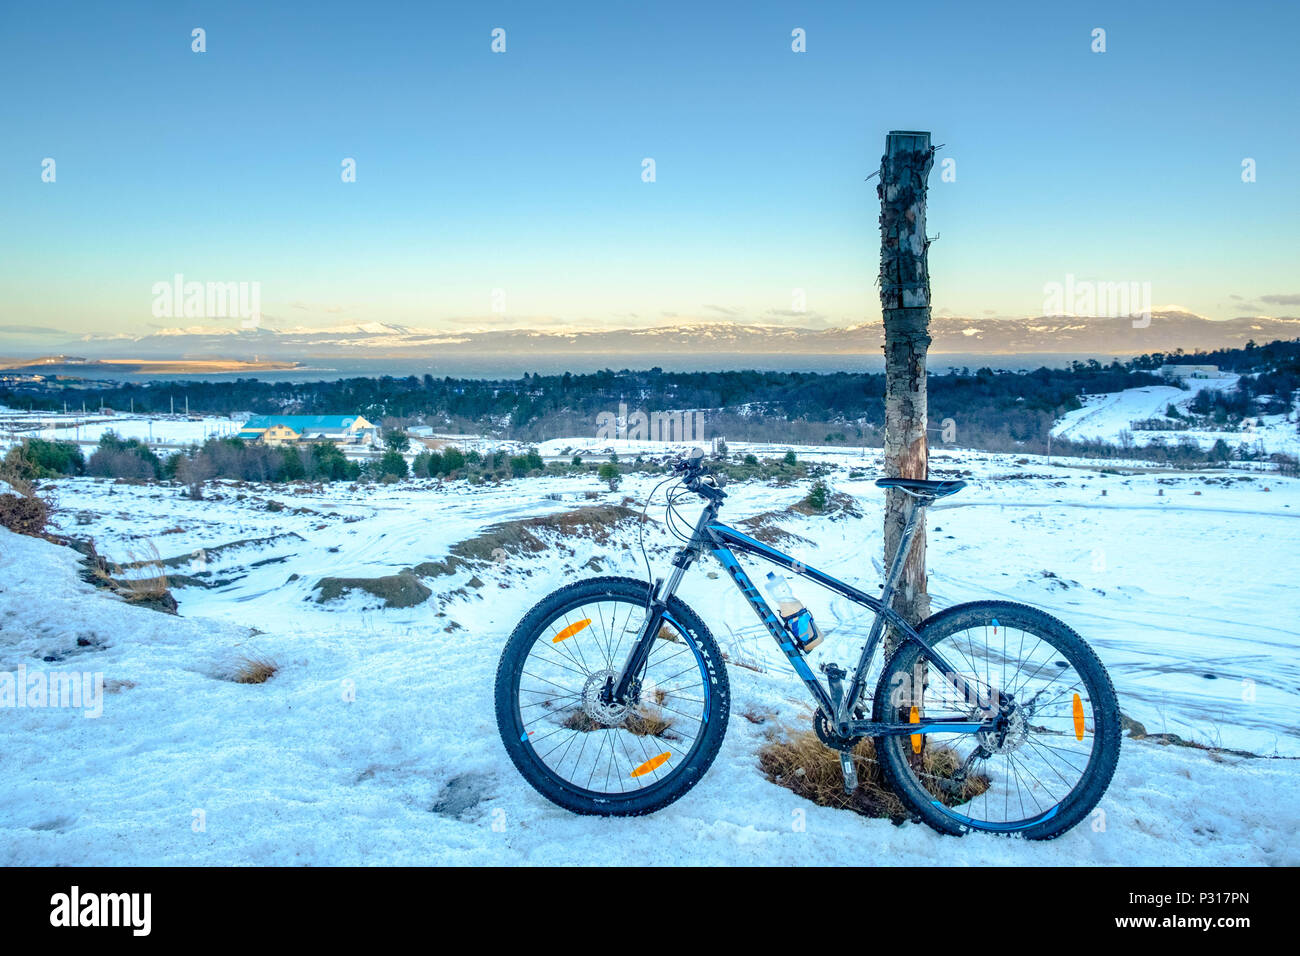 A Giant mountainbike stands against a pole in between Ushuaia and the National Park of Tierra del Fuego. Icy snow made the road very difficult. Stock Photo